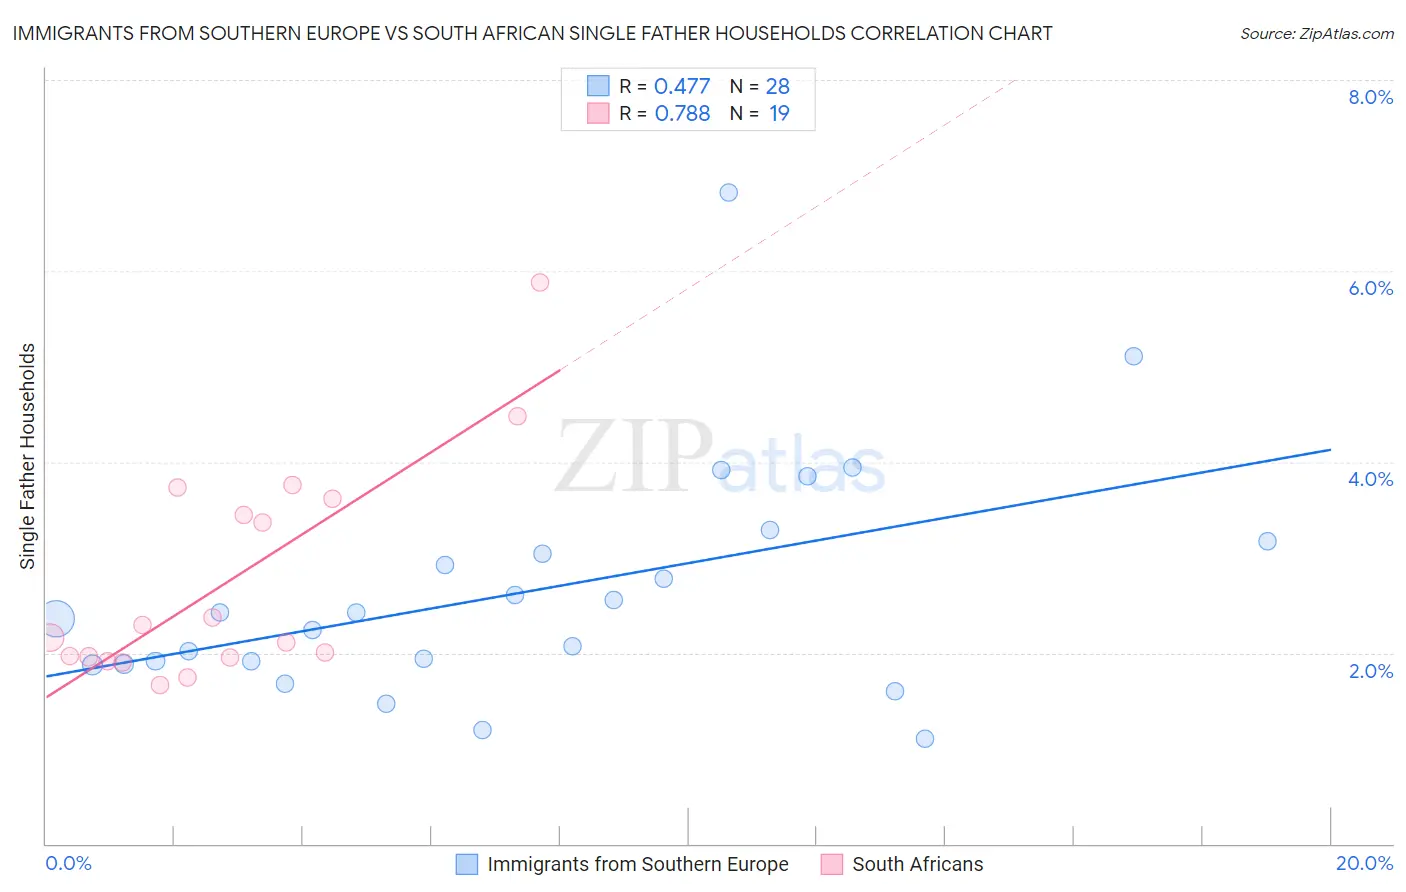 Immigrants from Southern Europe vs South African Single Father Households